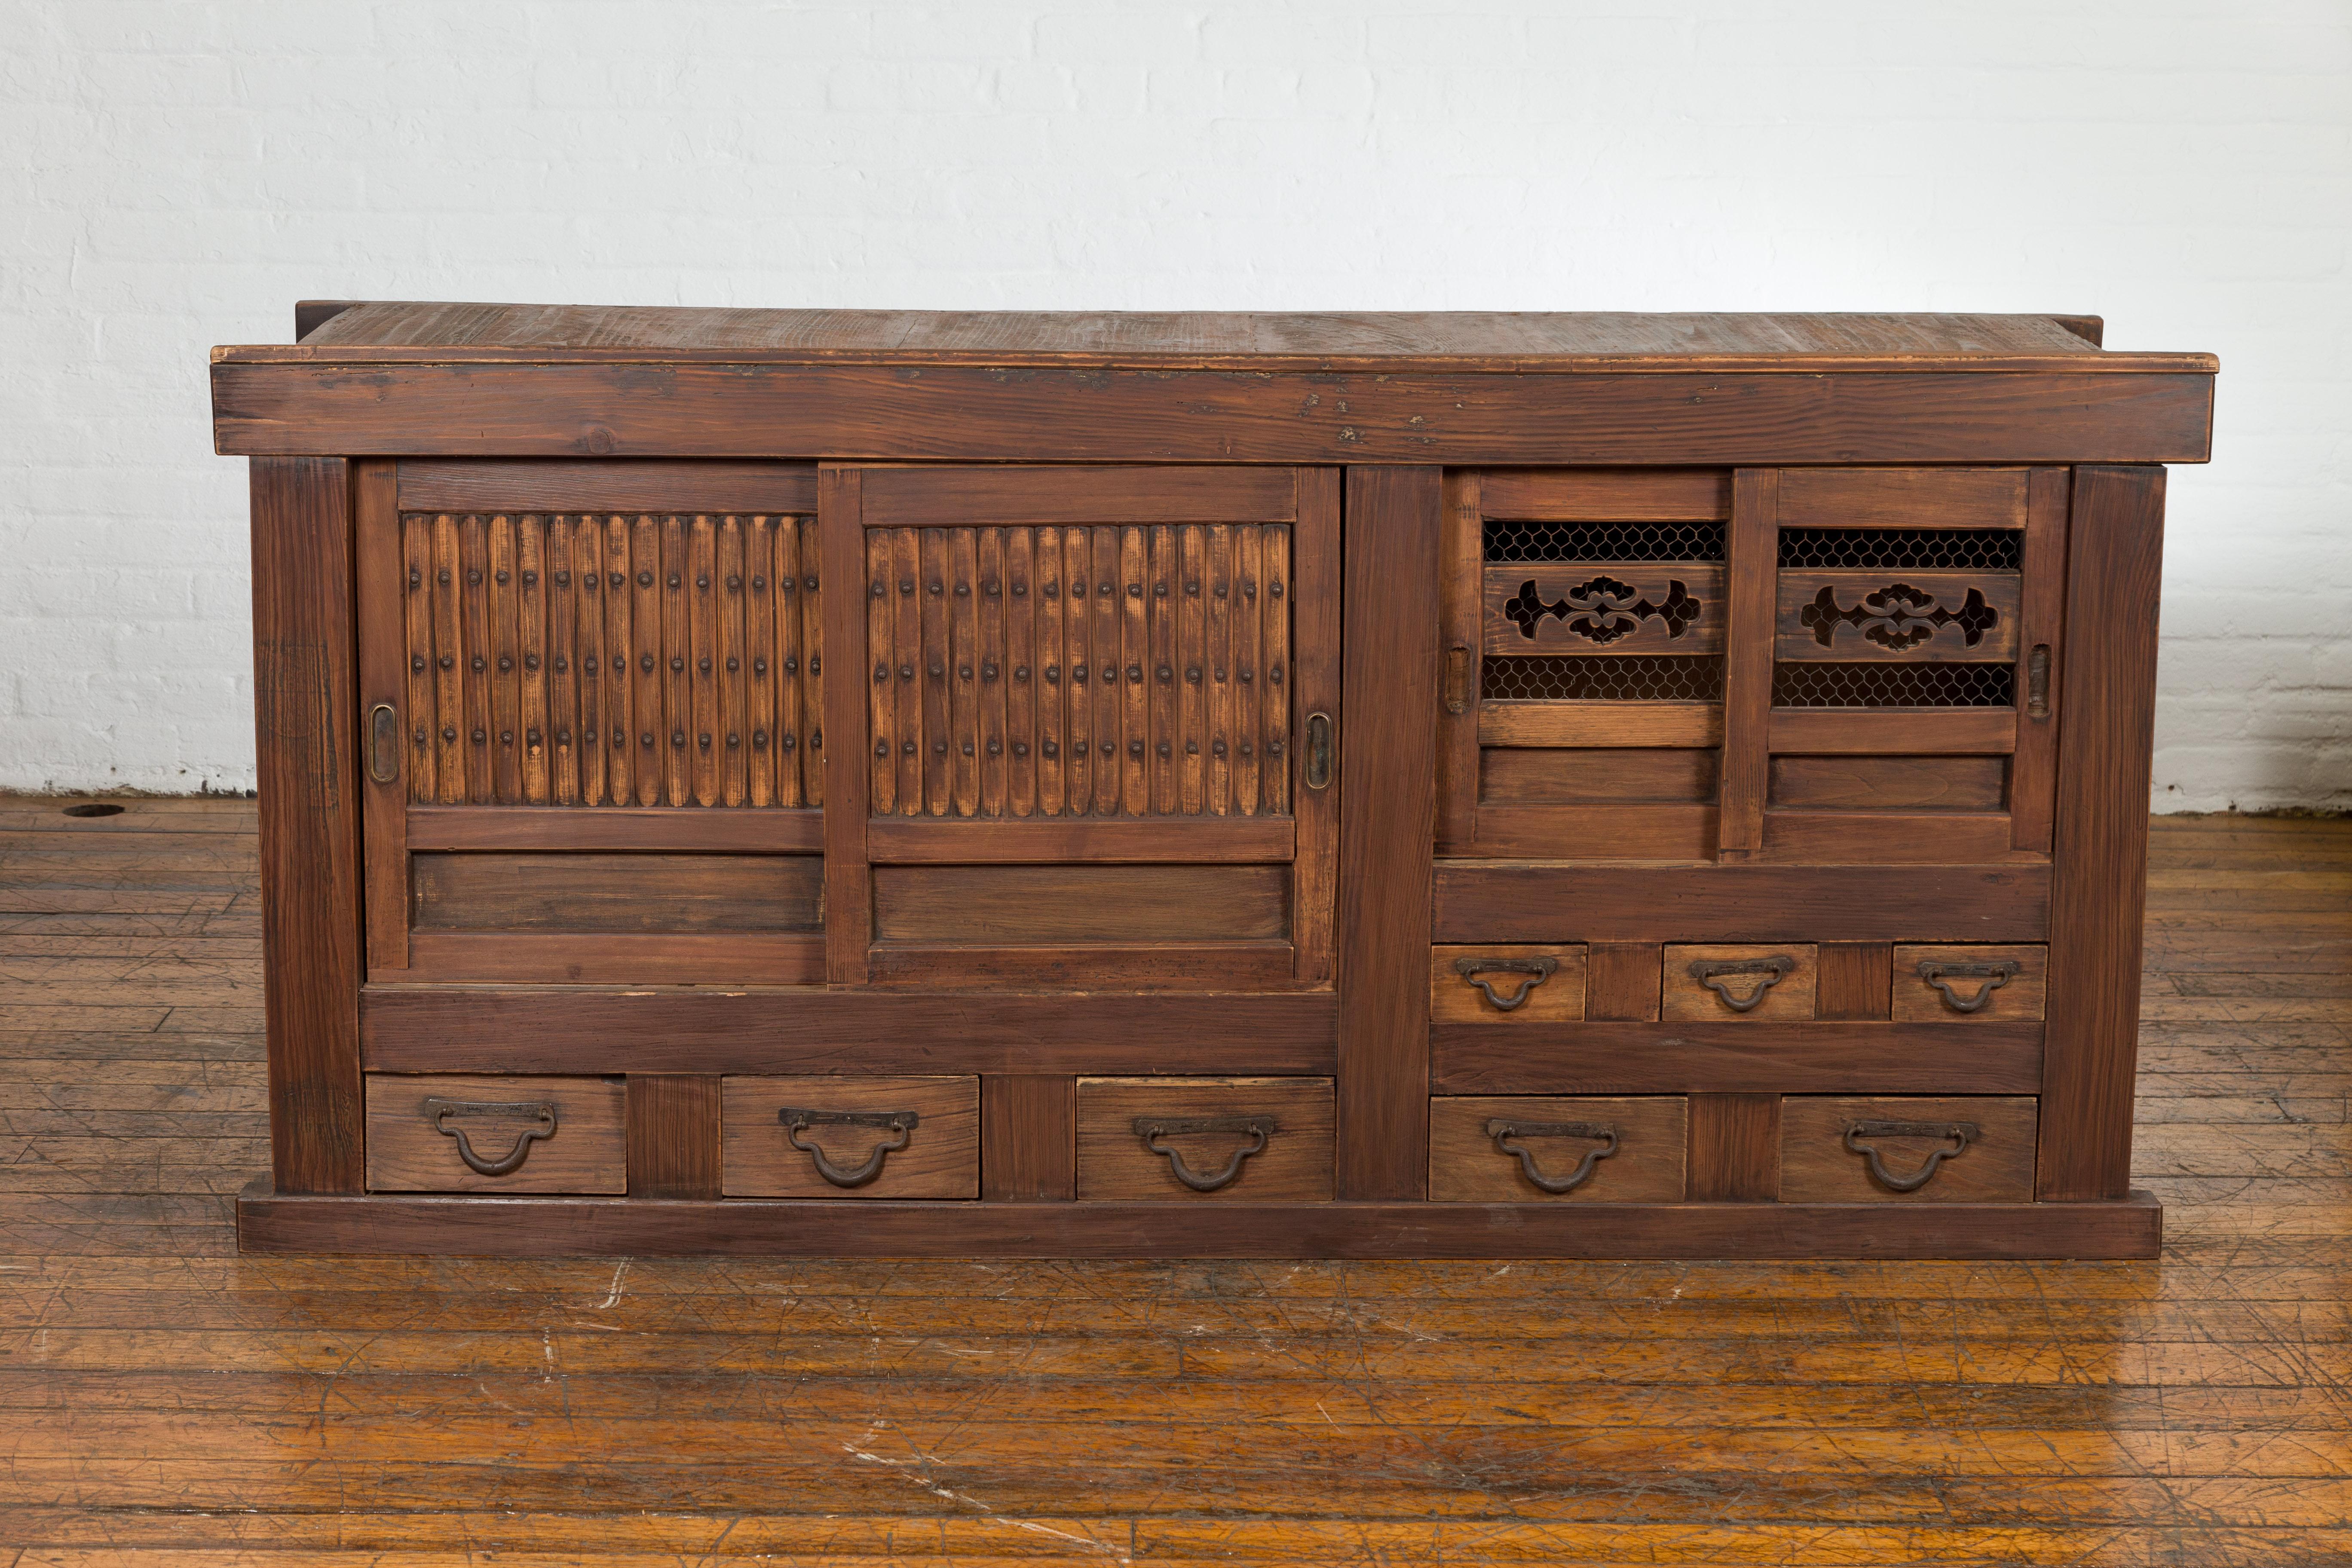 An antique Japanese Meiji period Mizuya kitchen tansu cabinet from the 19th century, with two pairs of sliding doors, eight drawers, carved motifs and iron hardware. Created in Japan during the Meiji period in the 19th Century, this Mizuya kitchen